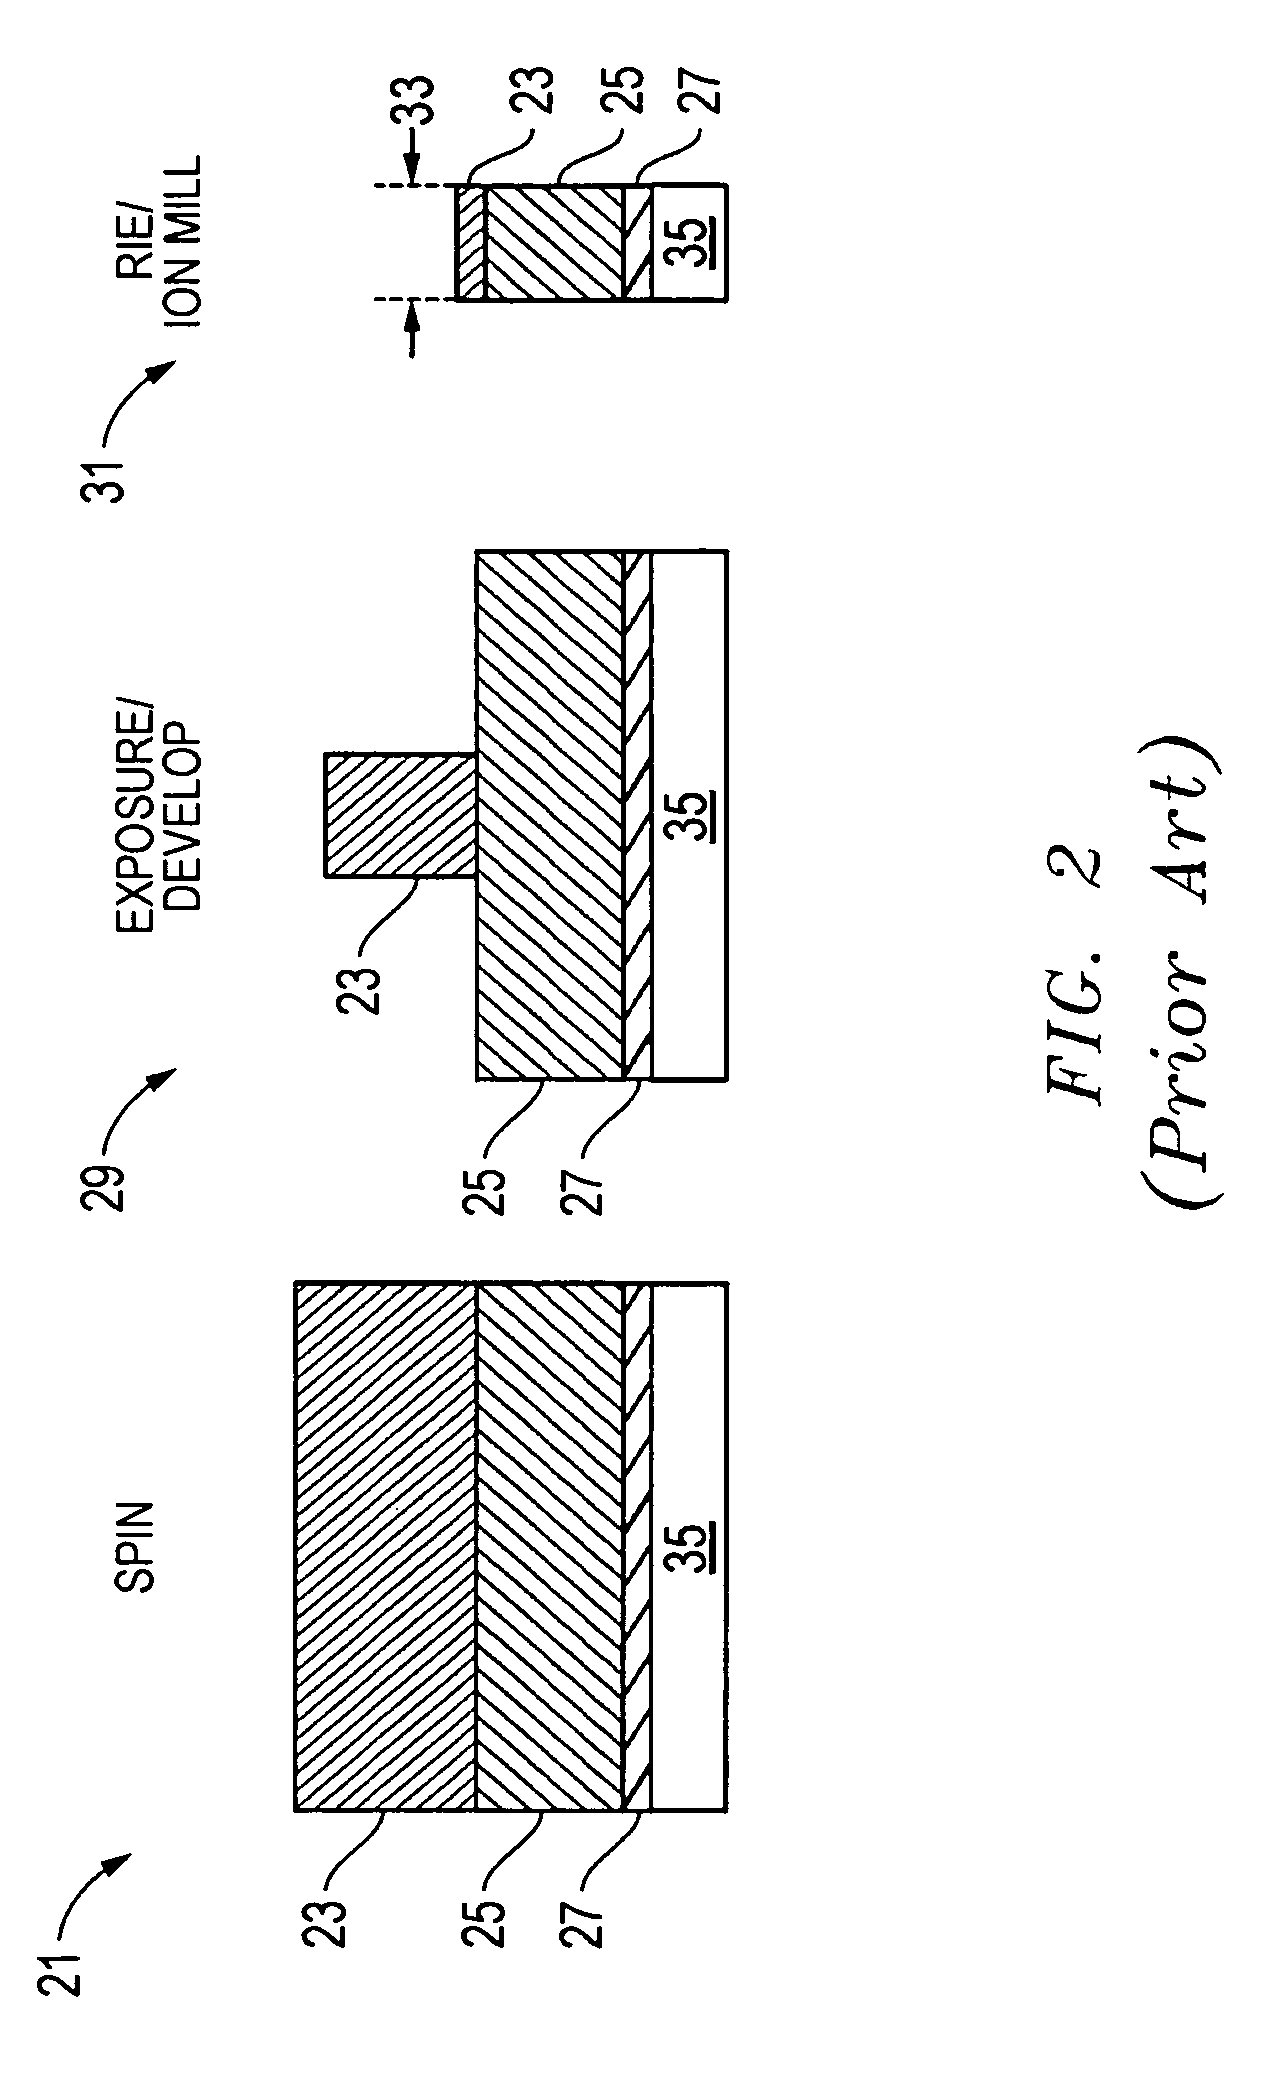 Method for sensor edge control and track width definition for narrow track width devices